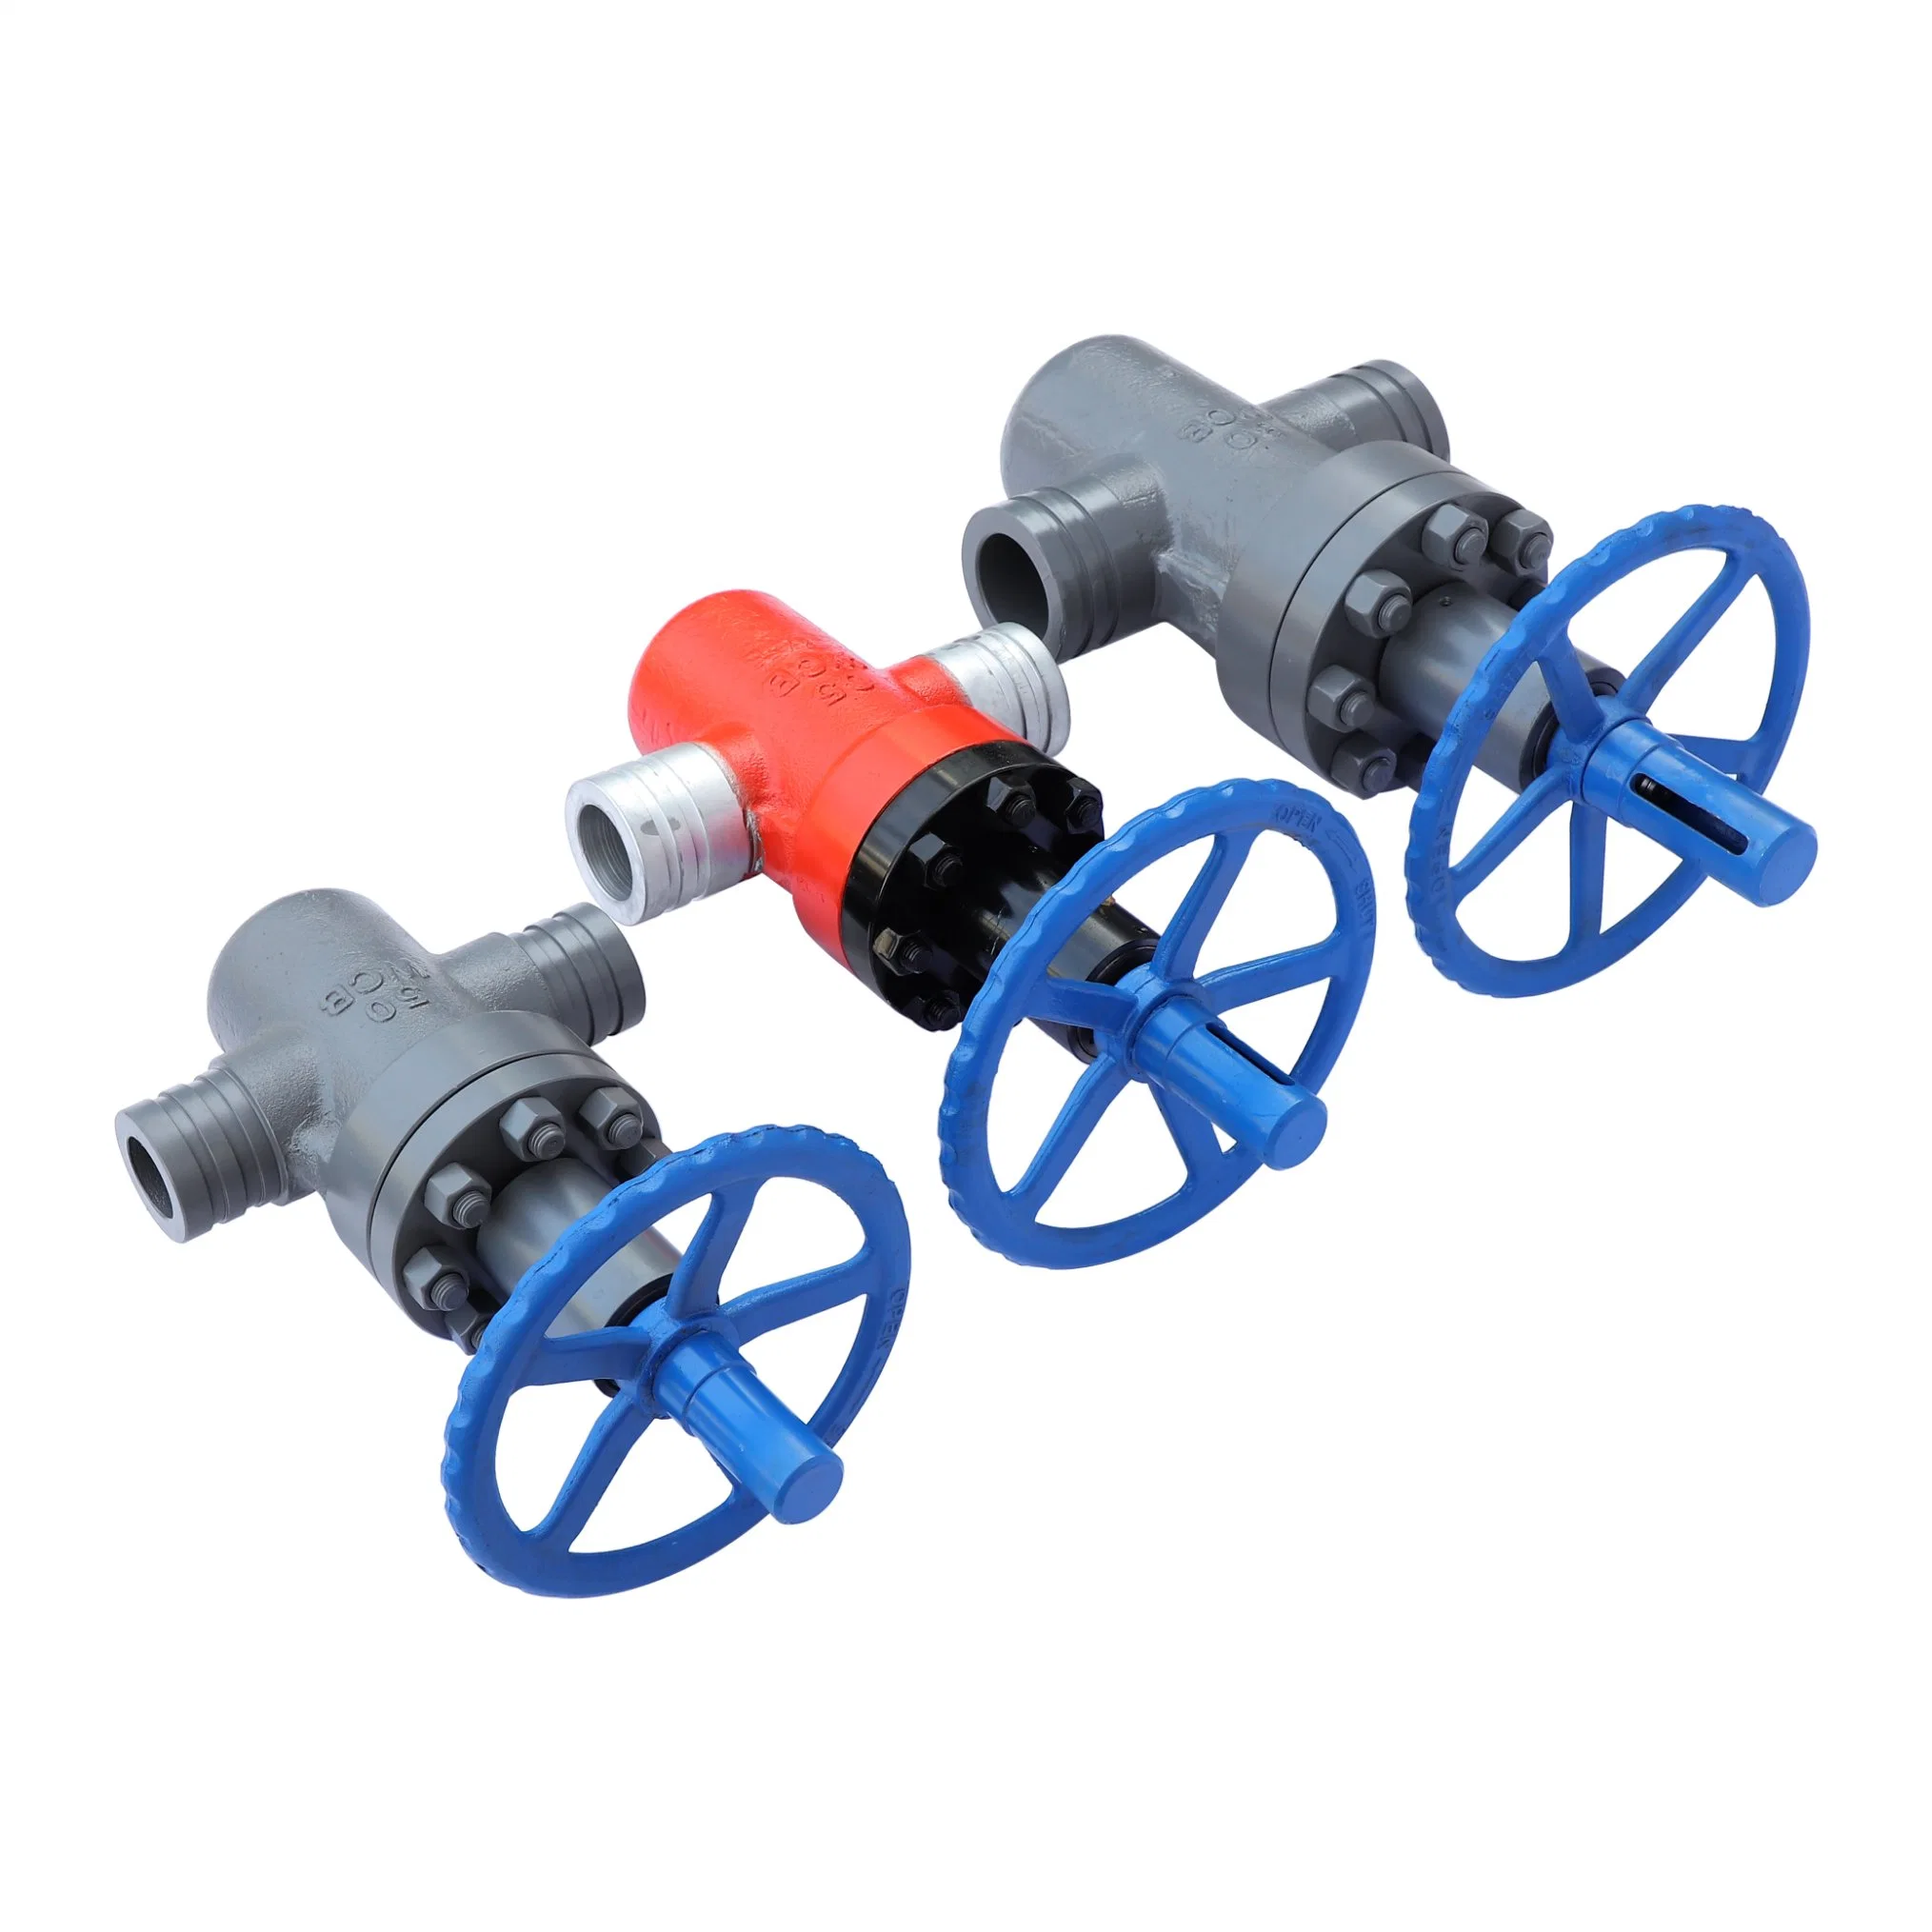 Chinese Gate Valve Stainless Steel Valve Ductile Iron Pipe Fitting